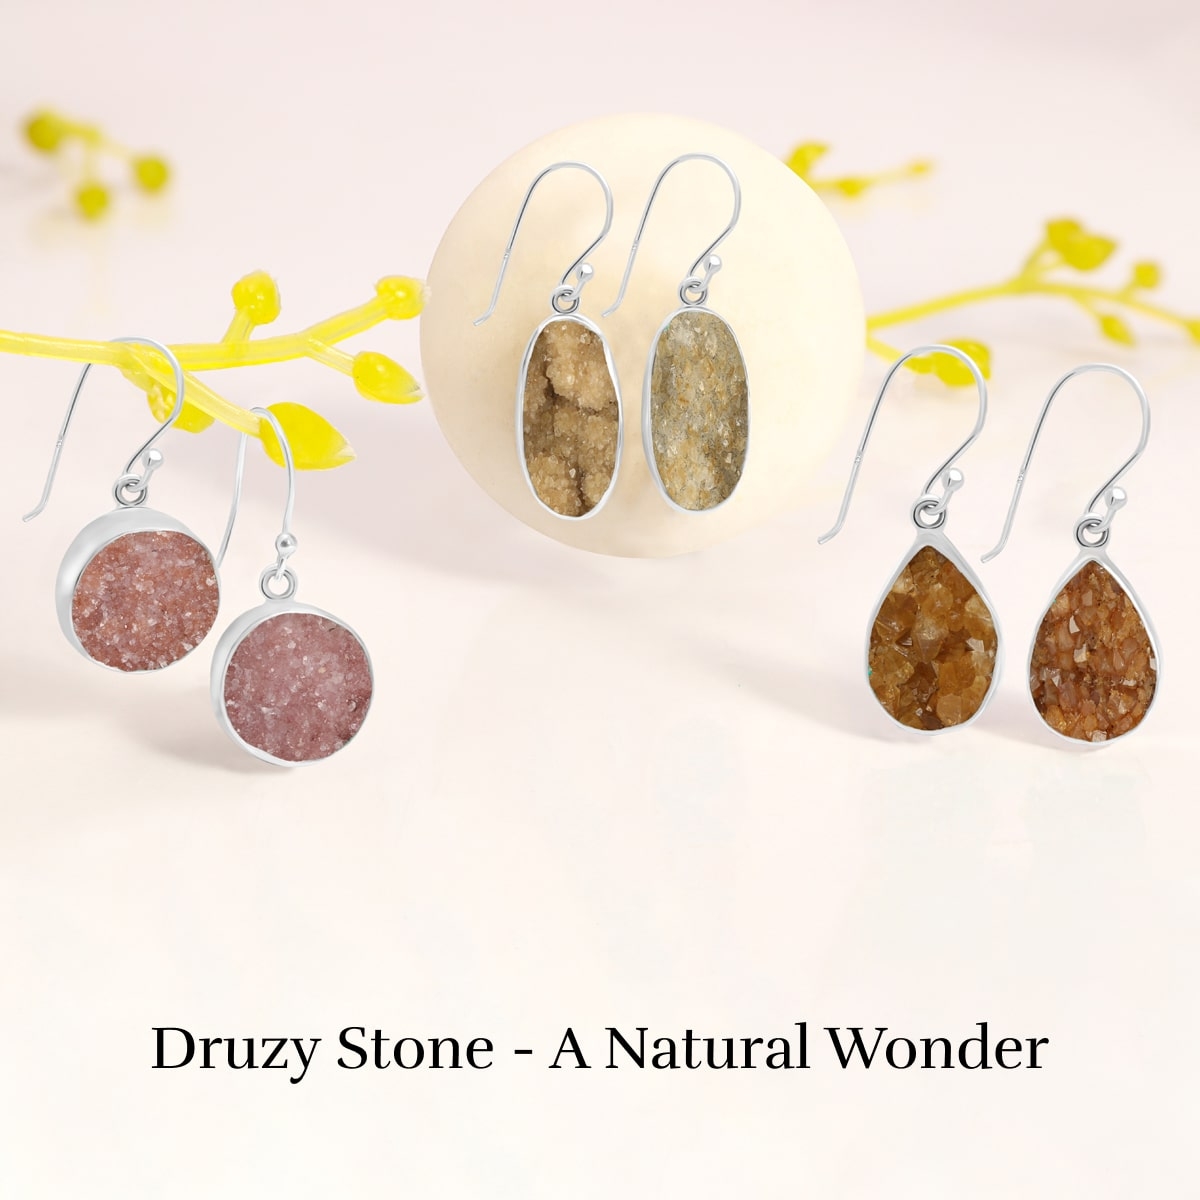 What is a Druzy Stone